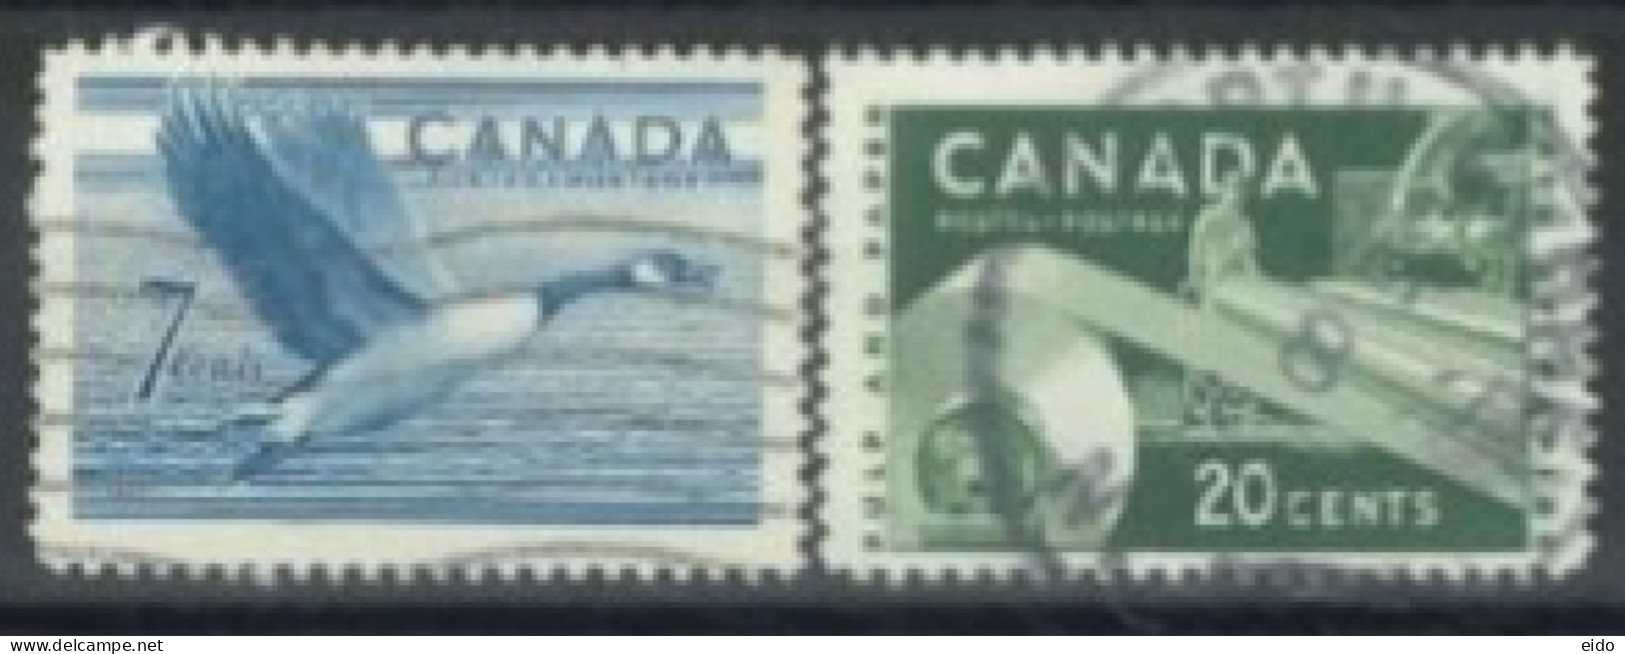 CANADA - 1952/53, CANADIAN GOOSE & PULP & PAPER INDUSTRY. STAMPS SET OF 2, USED. - Oblitérés